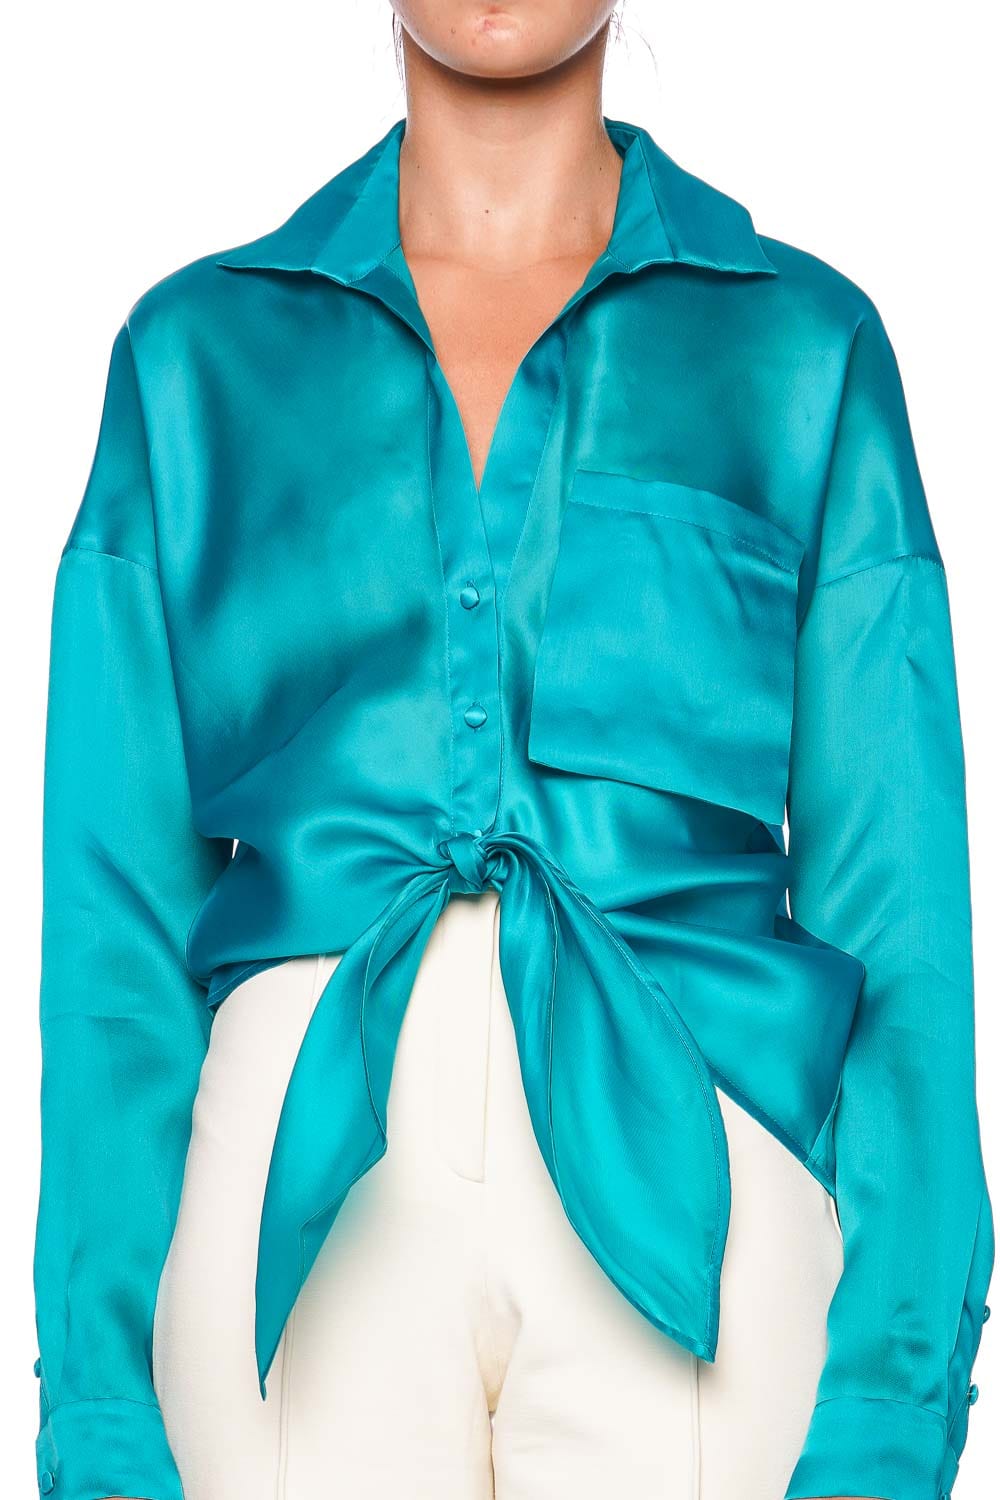 Andres Otalora Mulata Teal Knotted Button Front Blouse